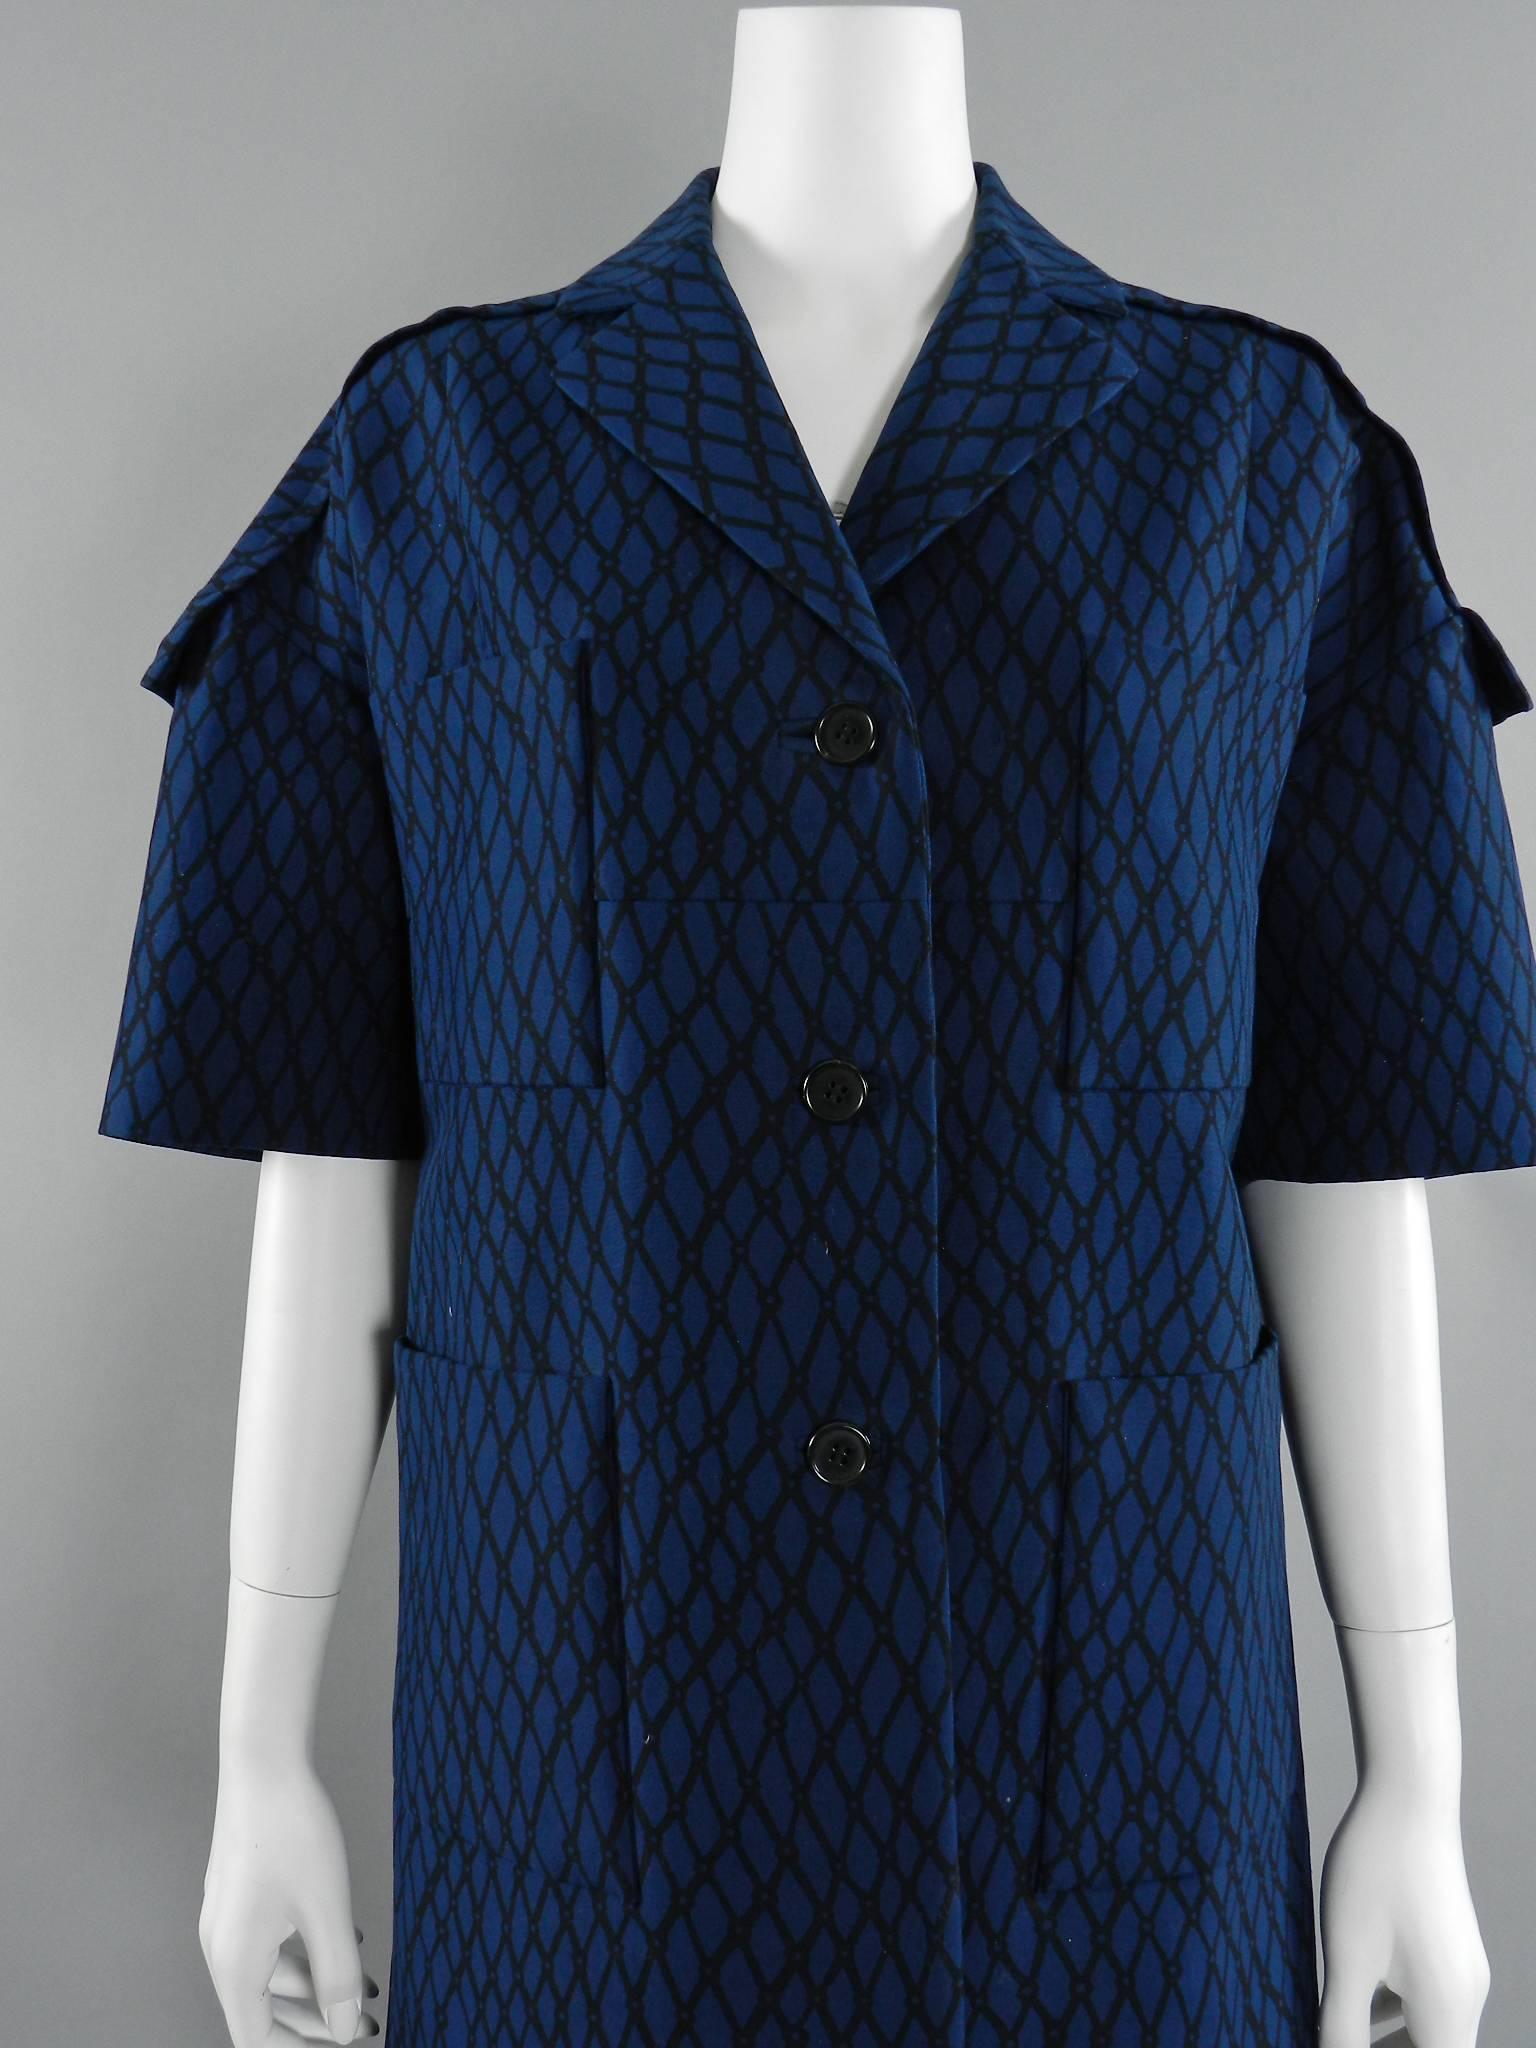 Marni dark blue and black geometric pattern coat. 100% cotton. Straight-cut oversized design with dropped shoulder seams, sort sleeves, and front pockets. Tagged size IT 40 (USA USA 2 / 4). Garment measures 41